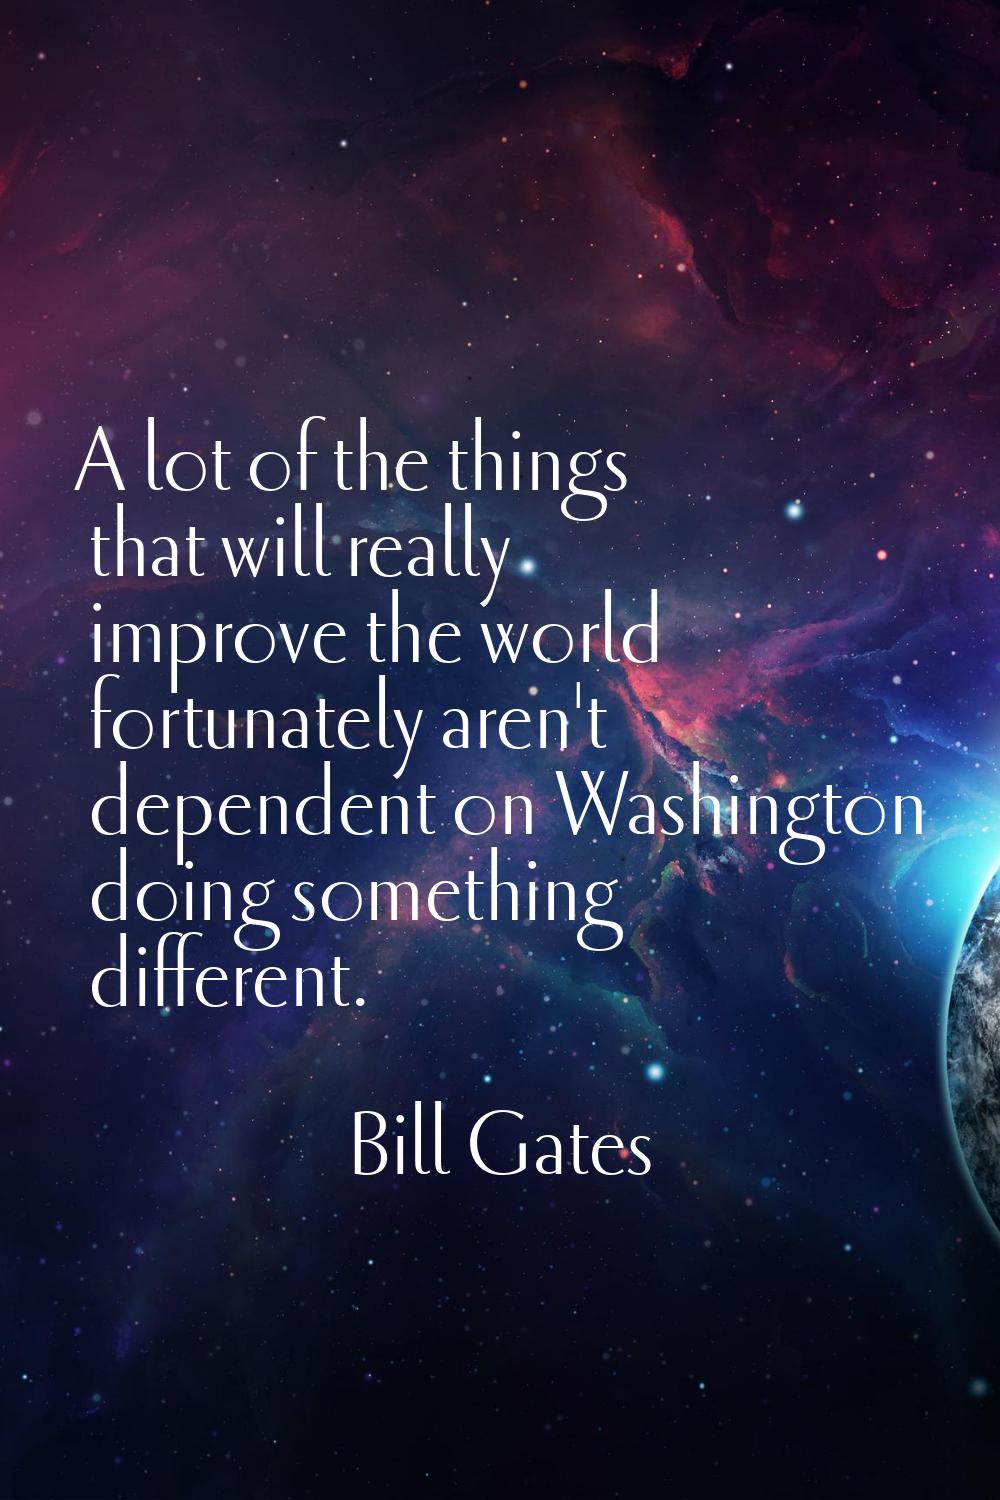 A lot of the things that will really improve the world fortunately aren't dependent on Washington d